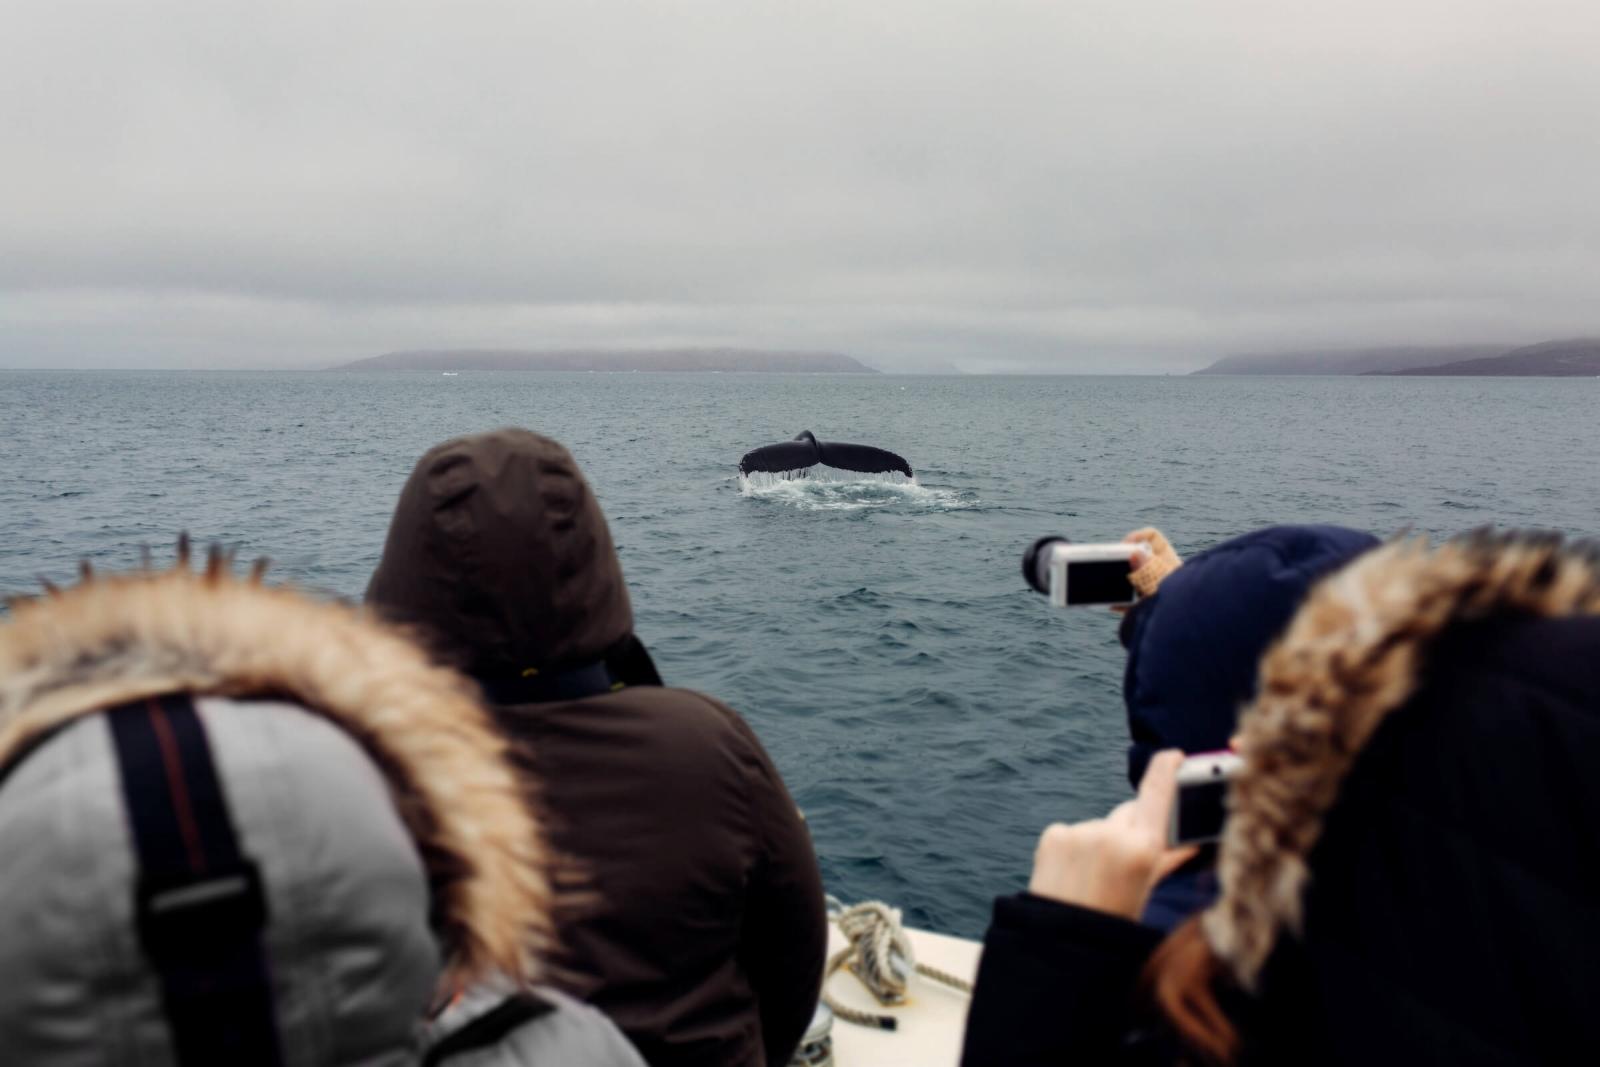 Group of tourist taking photos of a passing humpback whale. Photo by Rebecca Gustafsson